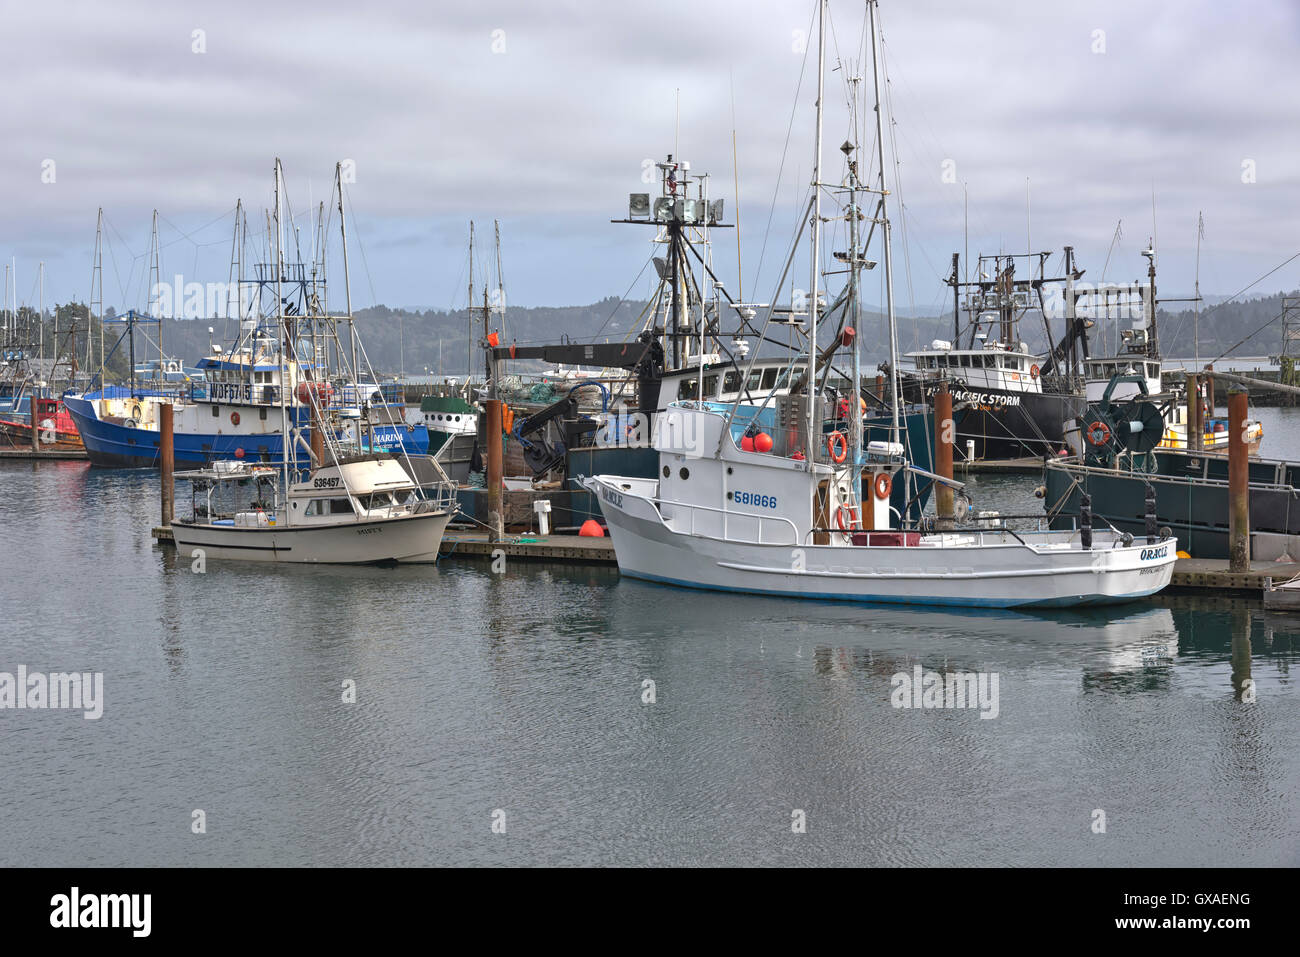 Fishing vessels with raised outriggers moored in Newport bay marina Oregon. Stock Photo